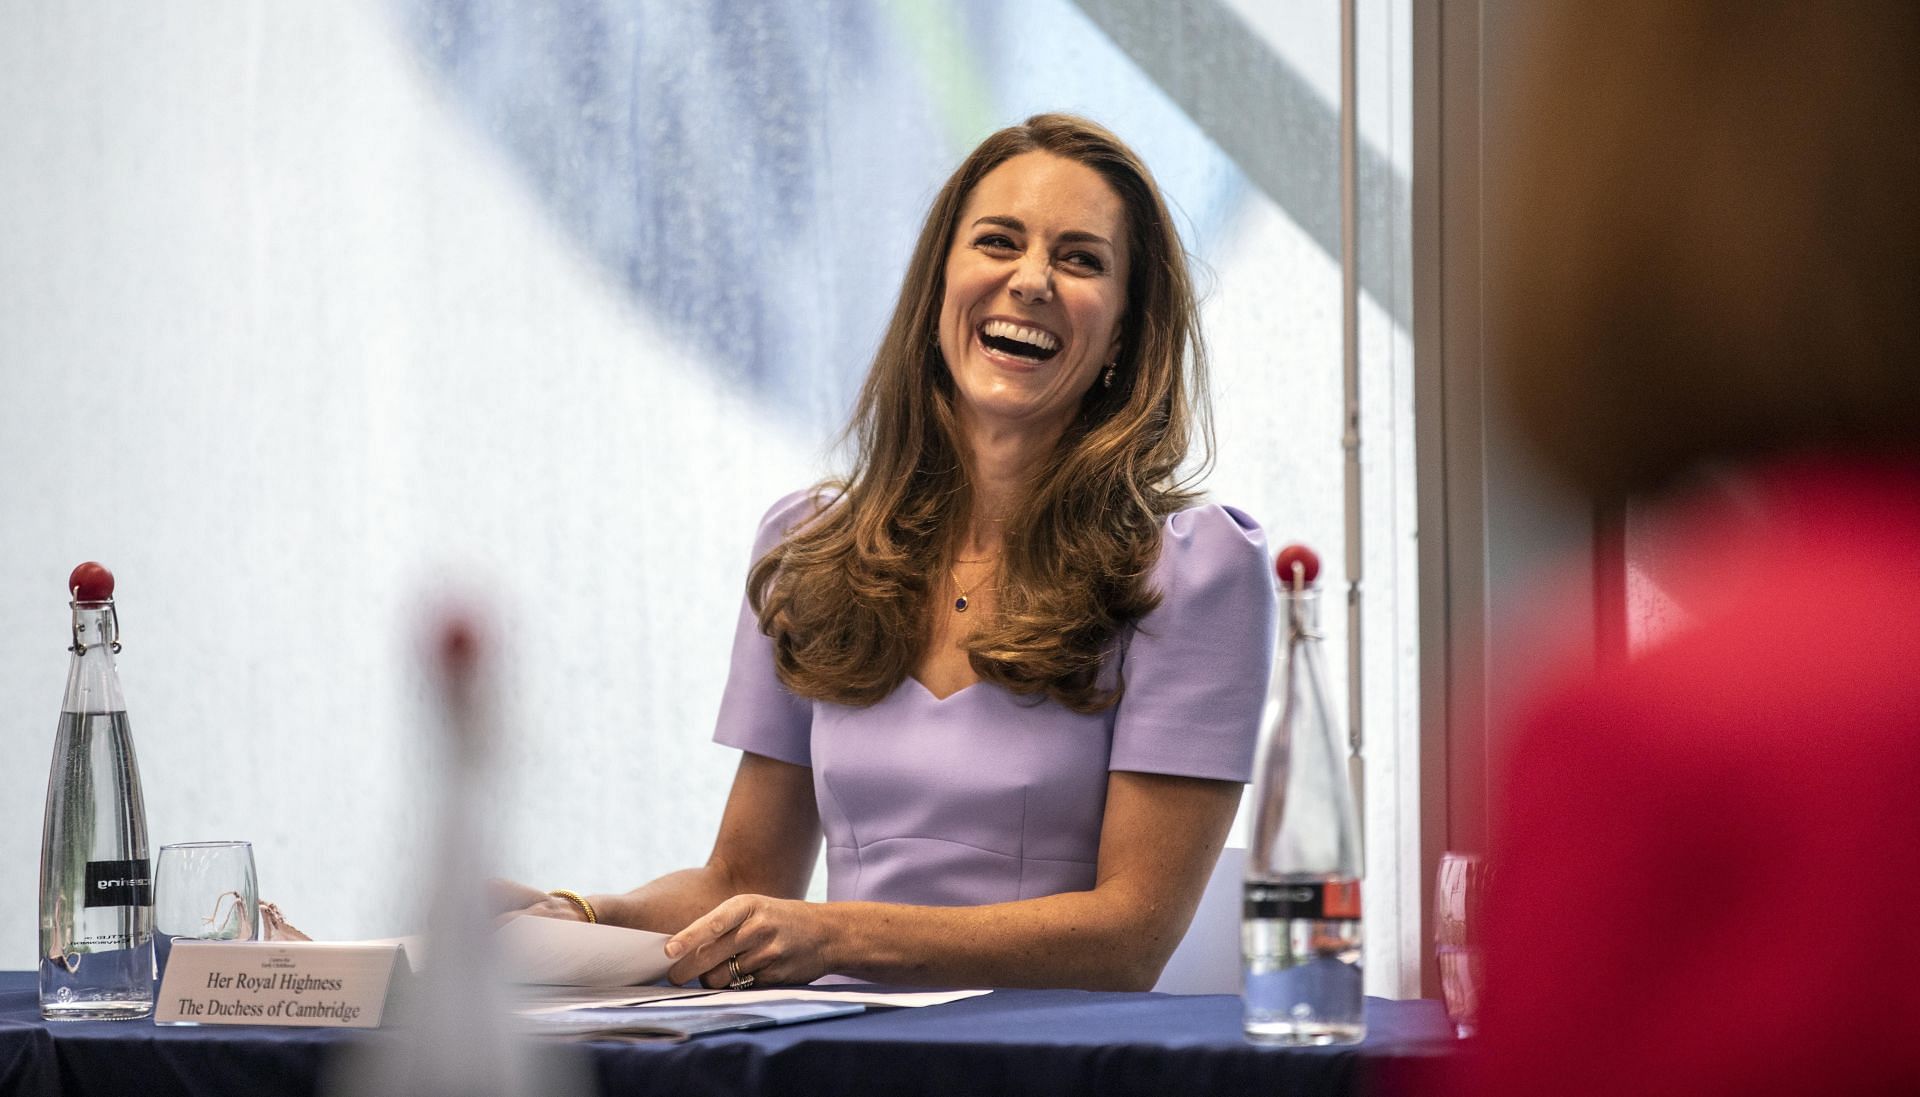 The Duchess Of Cambridge Launches The Royal Foundation Centre For Early Childhood in 2021 (Source: Getty)